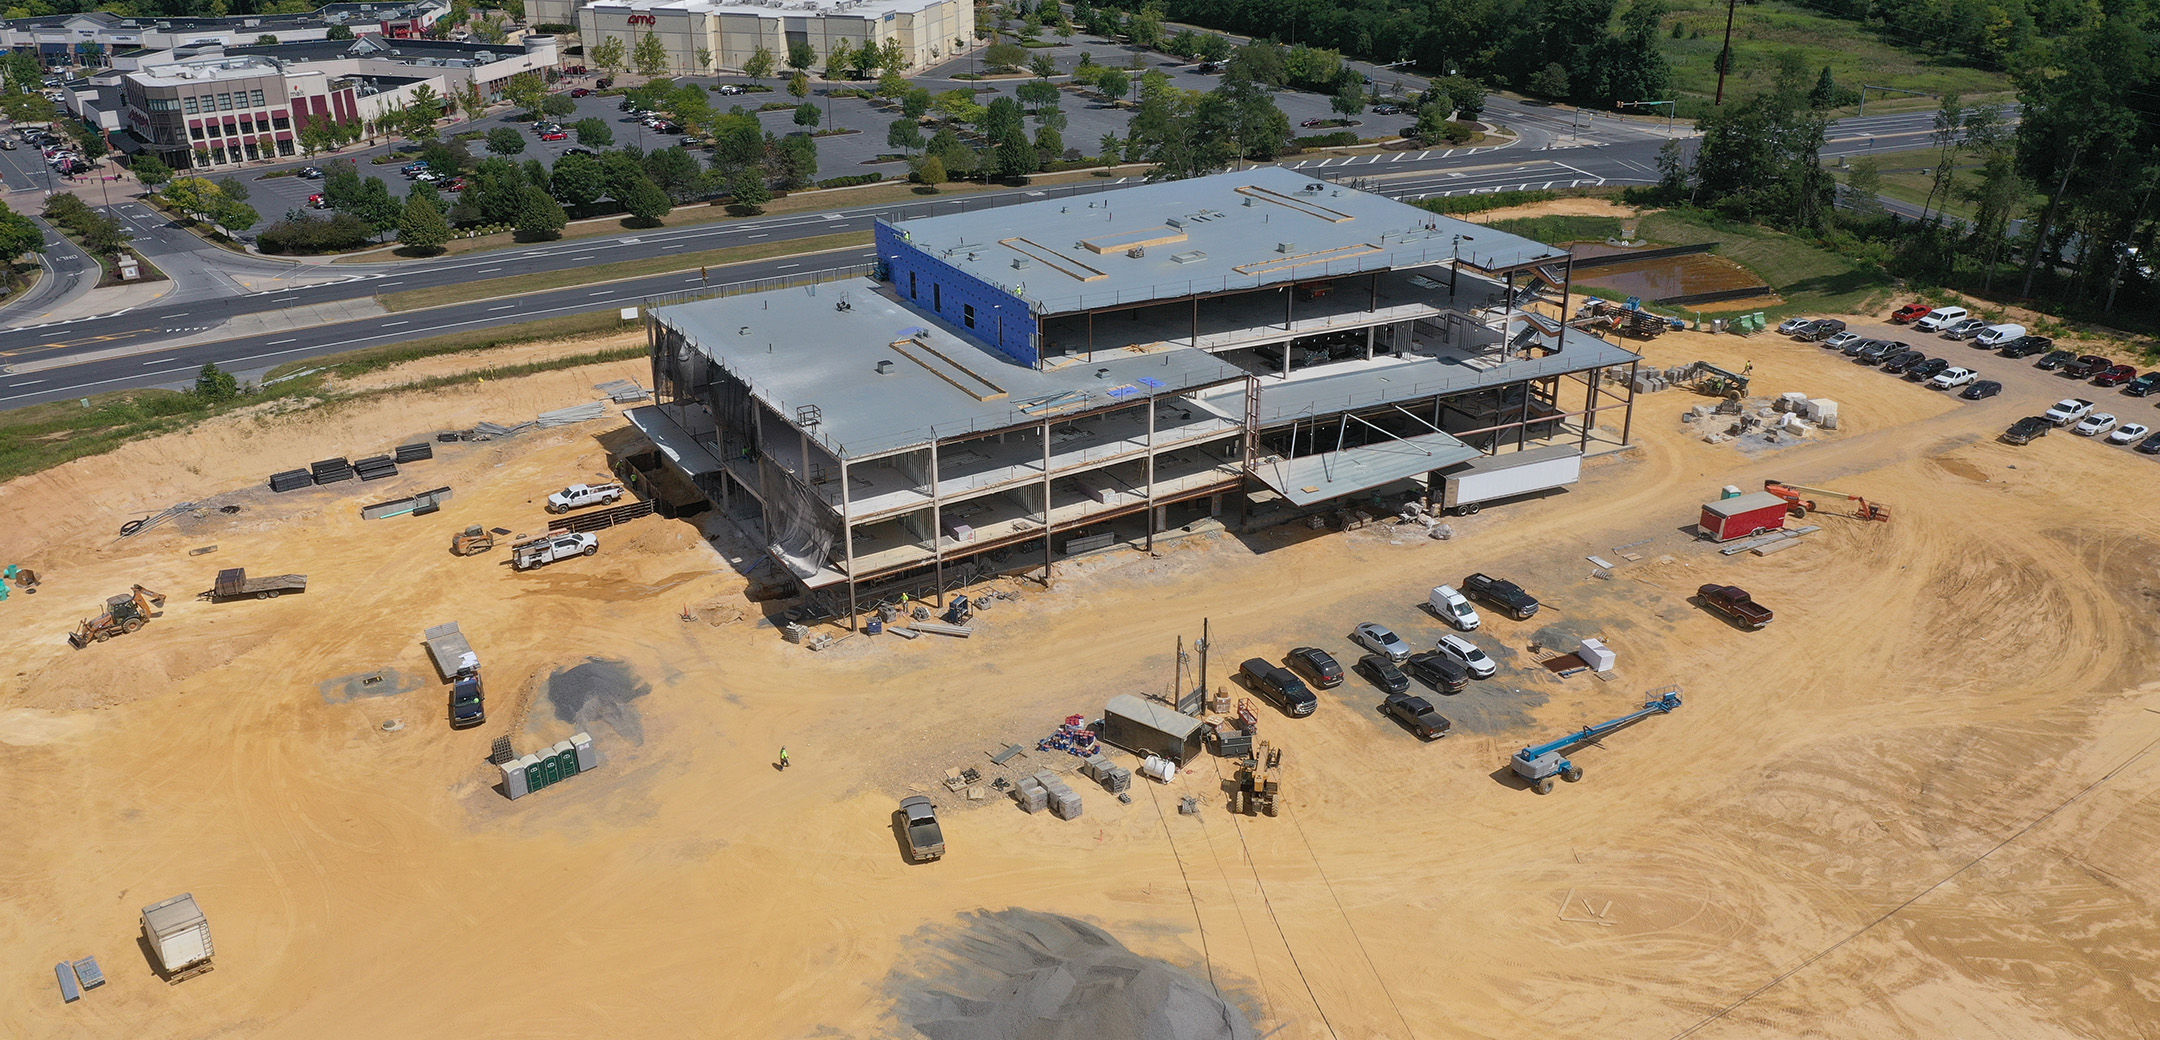 An aerial view of an active construction site of a large building